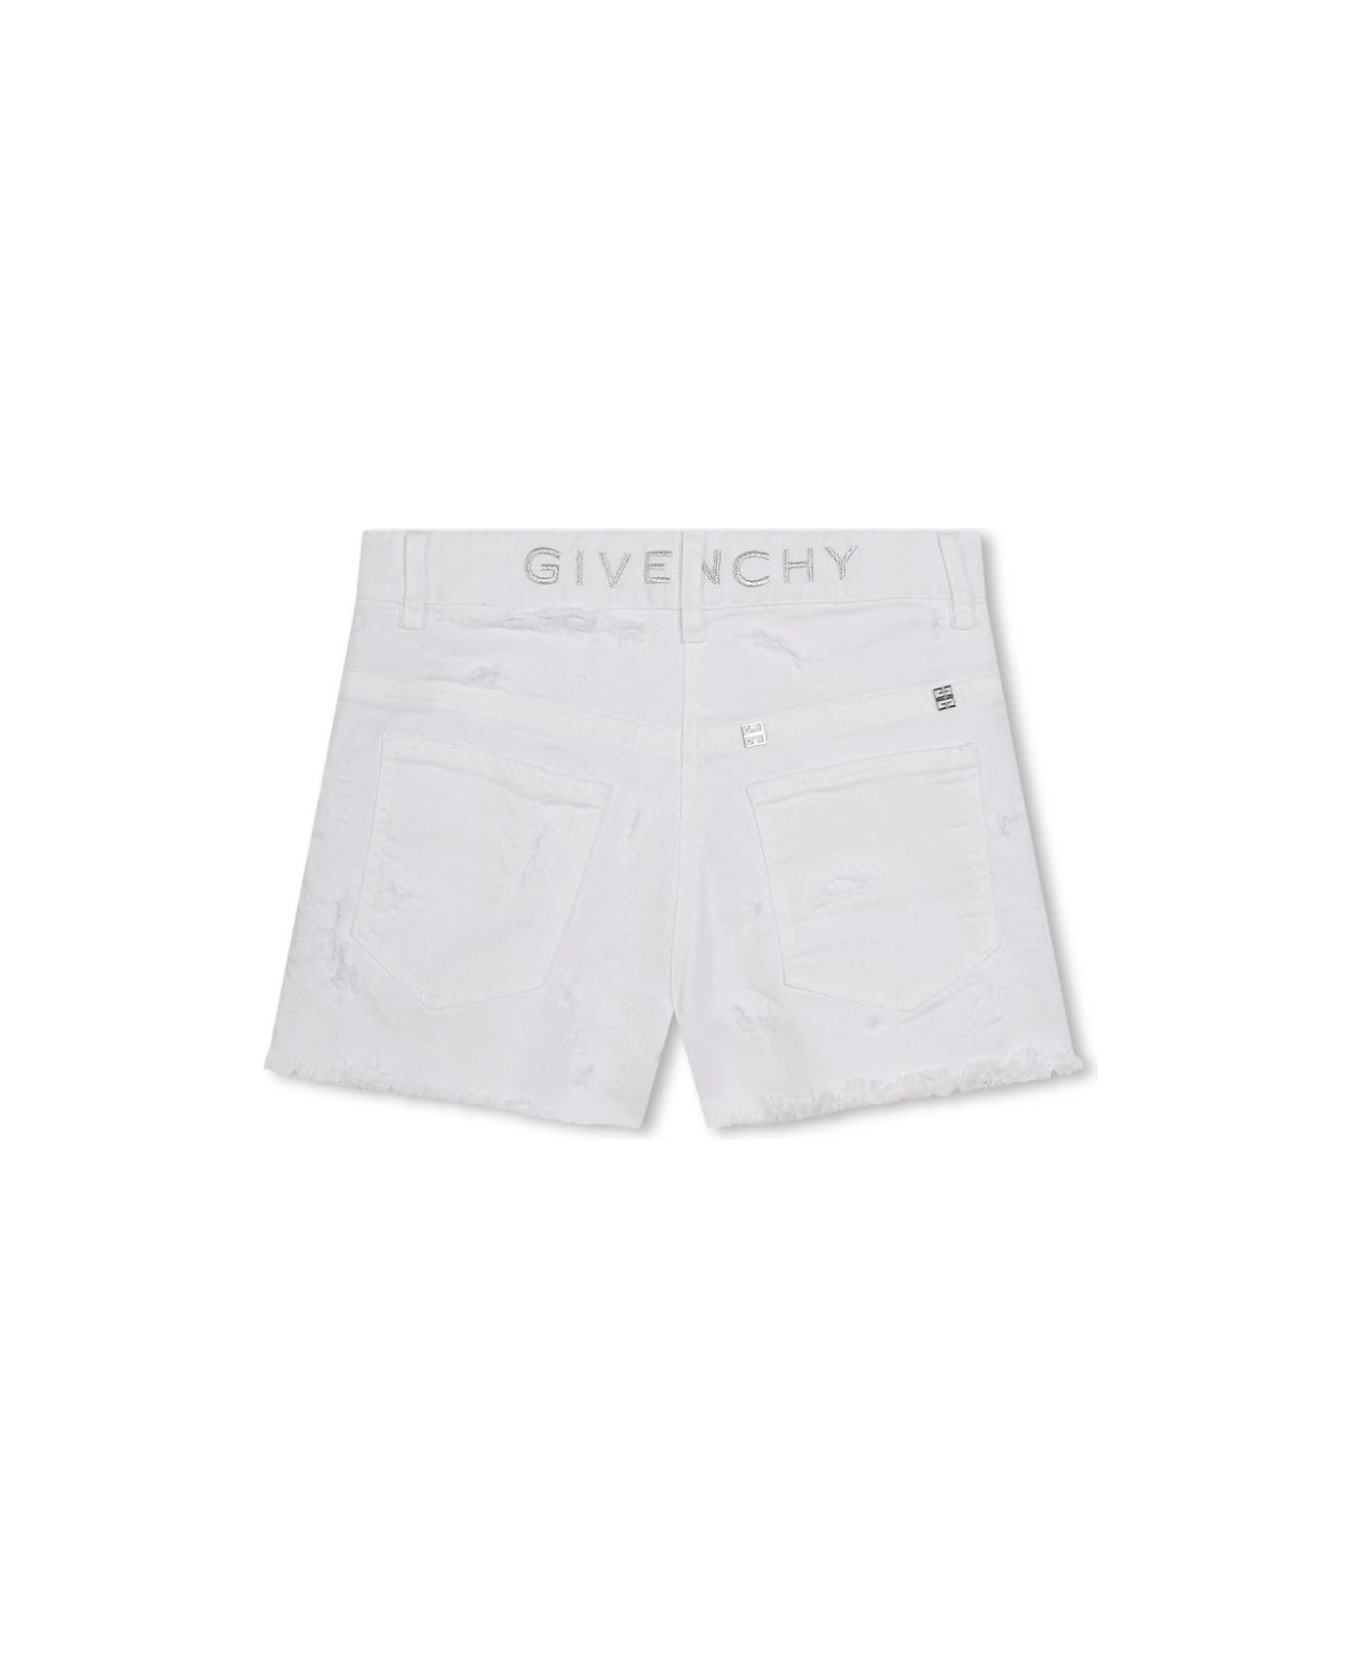 Givenchy White Shorts With Worn Effect - Bianco ボトムス